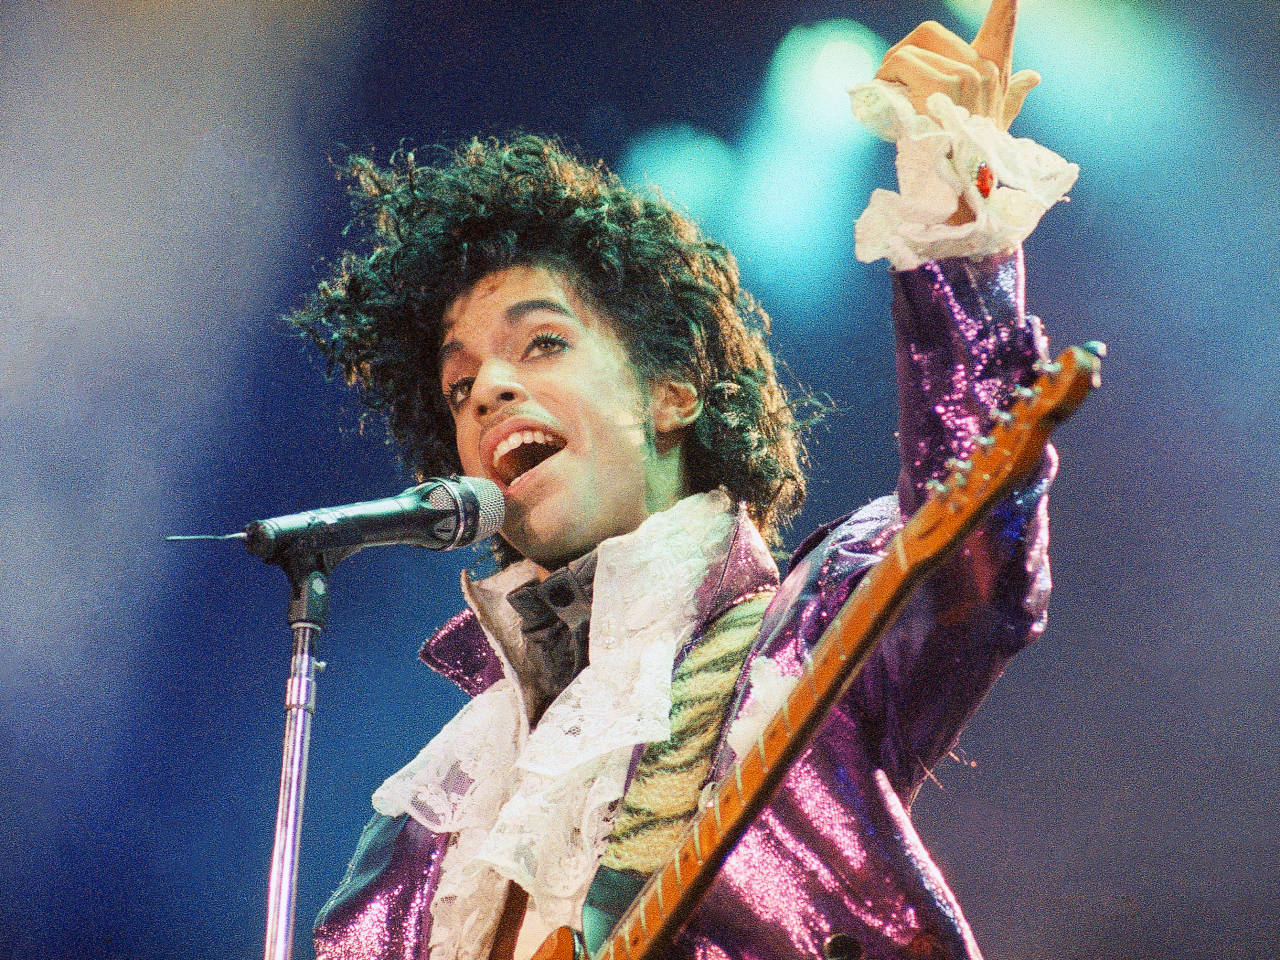 Bonus - A discussion on the death and legacy of Prince with Steve Spears